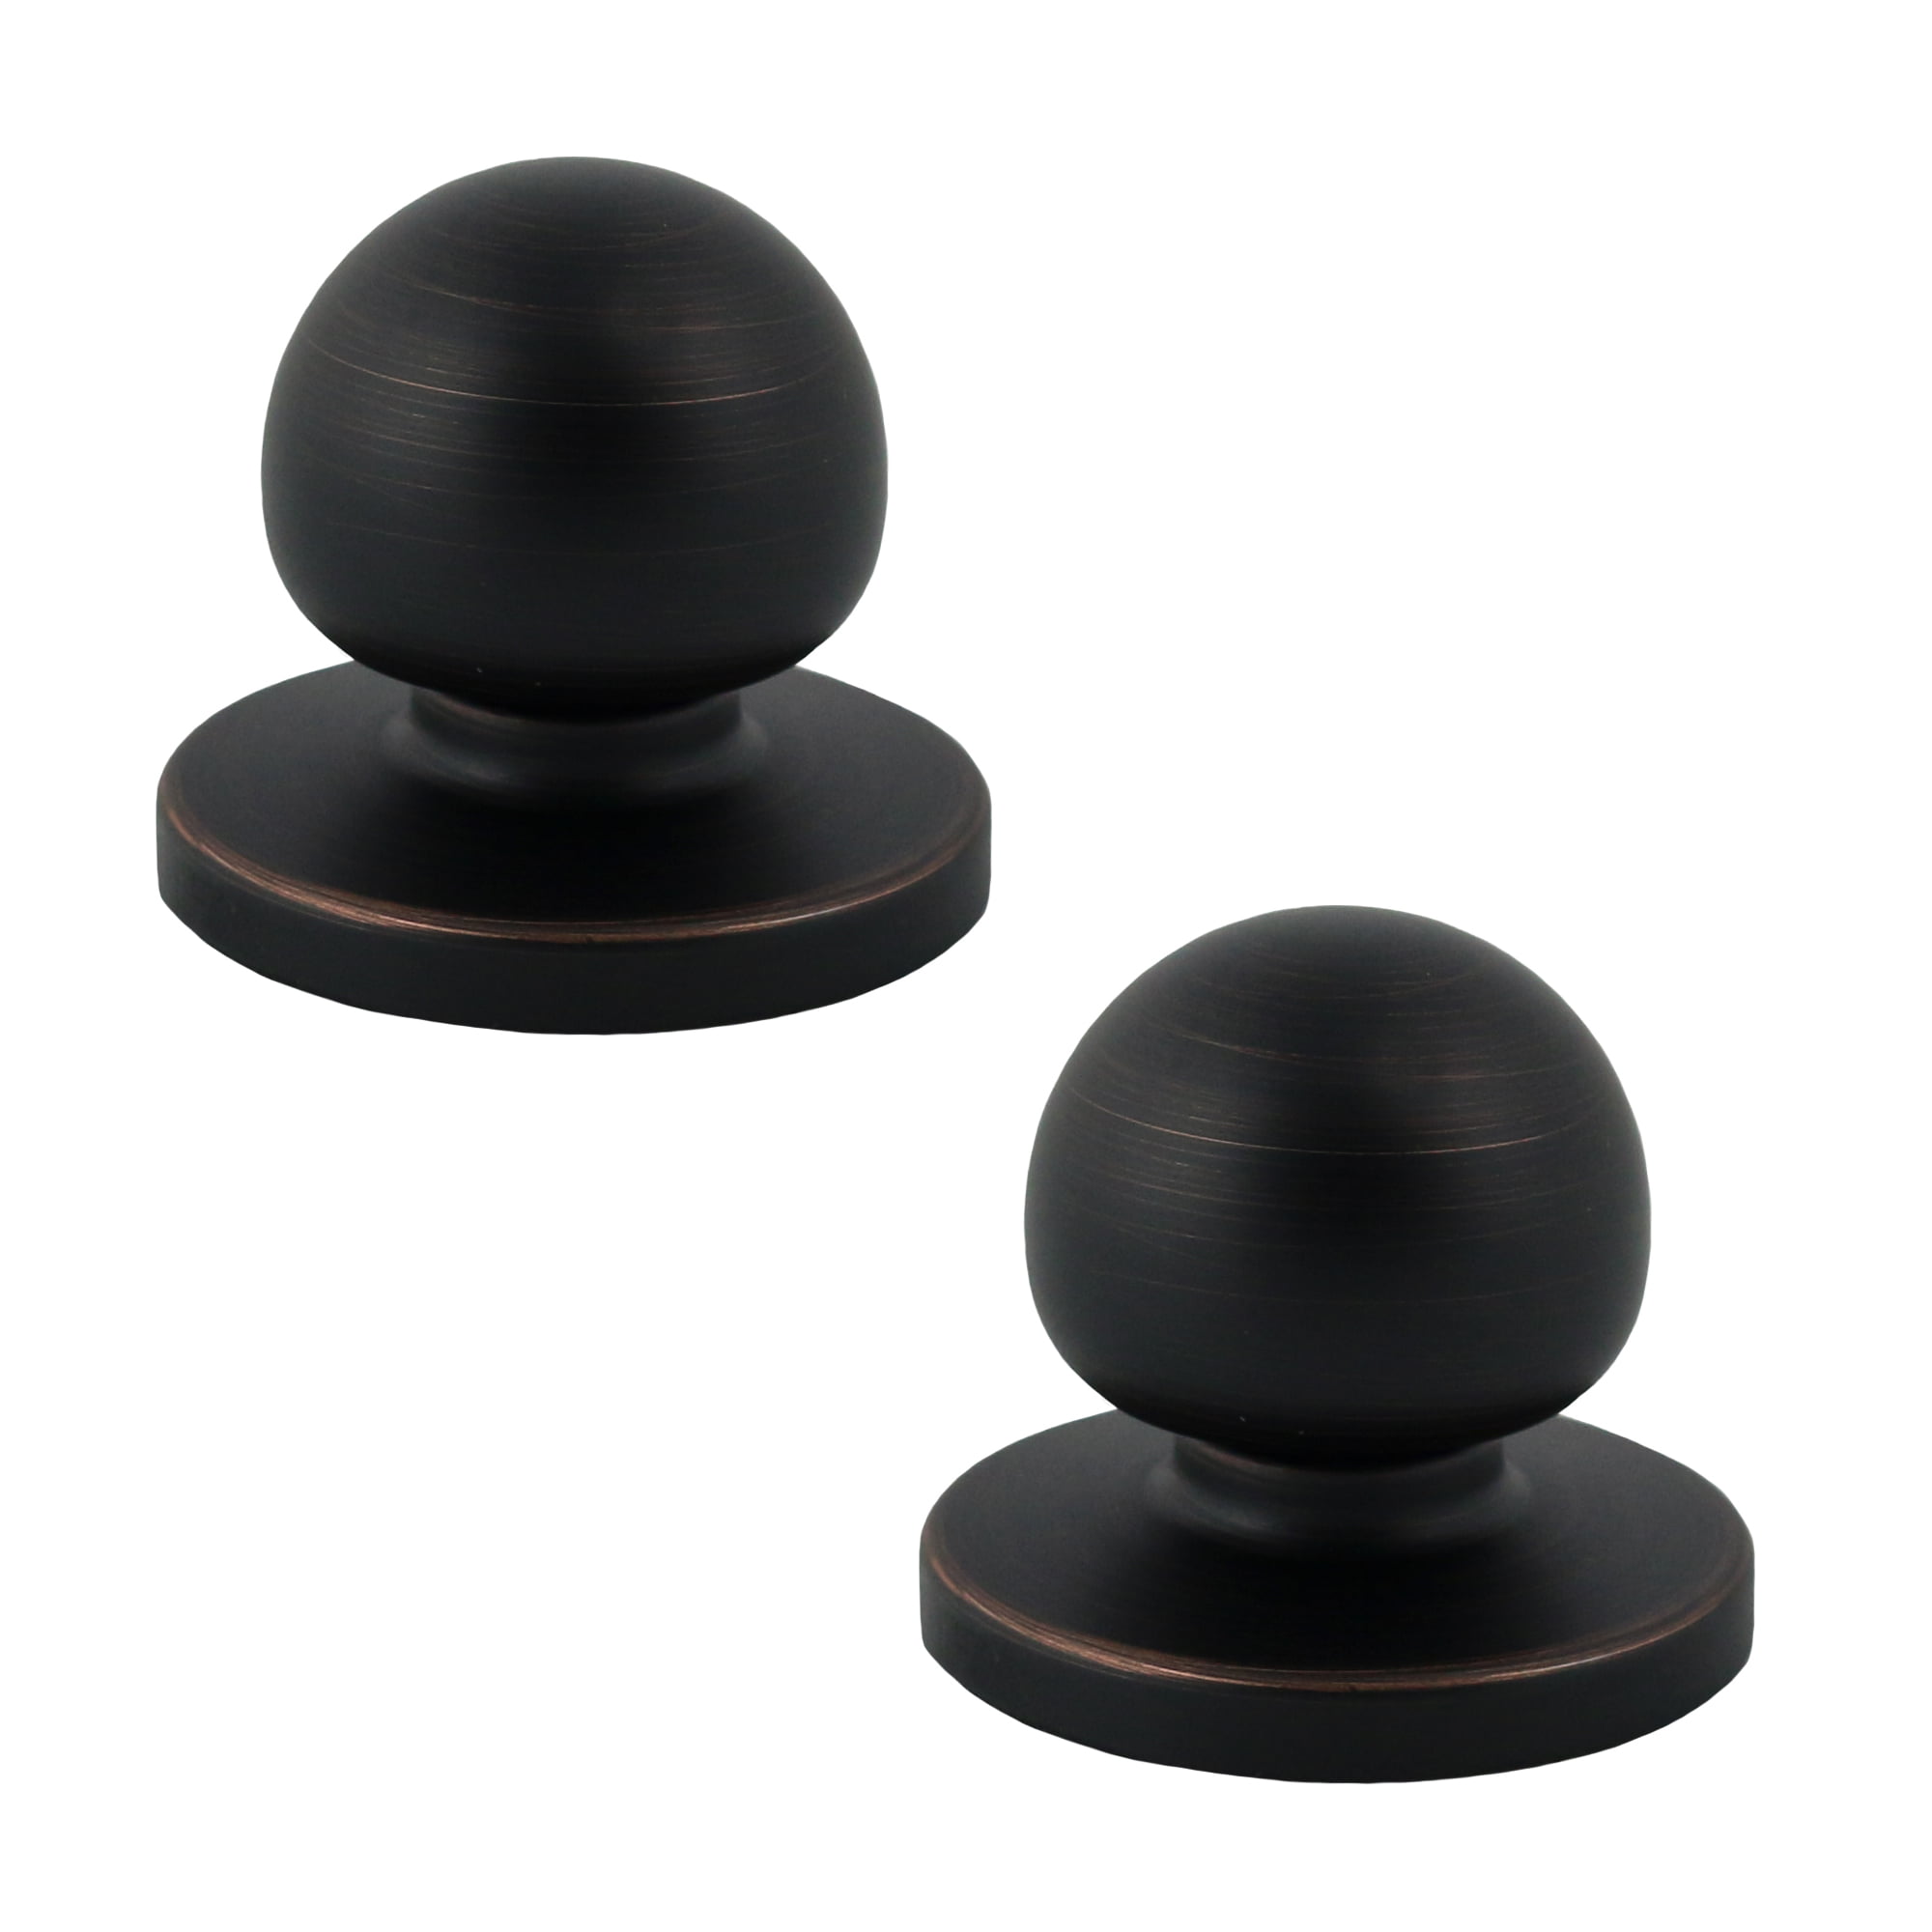 4 Pack of Oil Rubbed Bronze Bi-fold Knobs with Backplates 